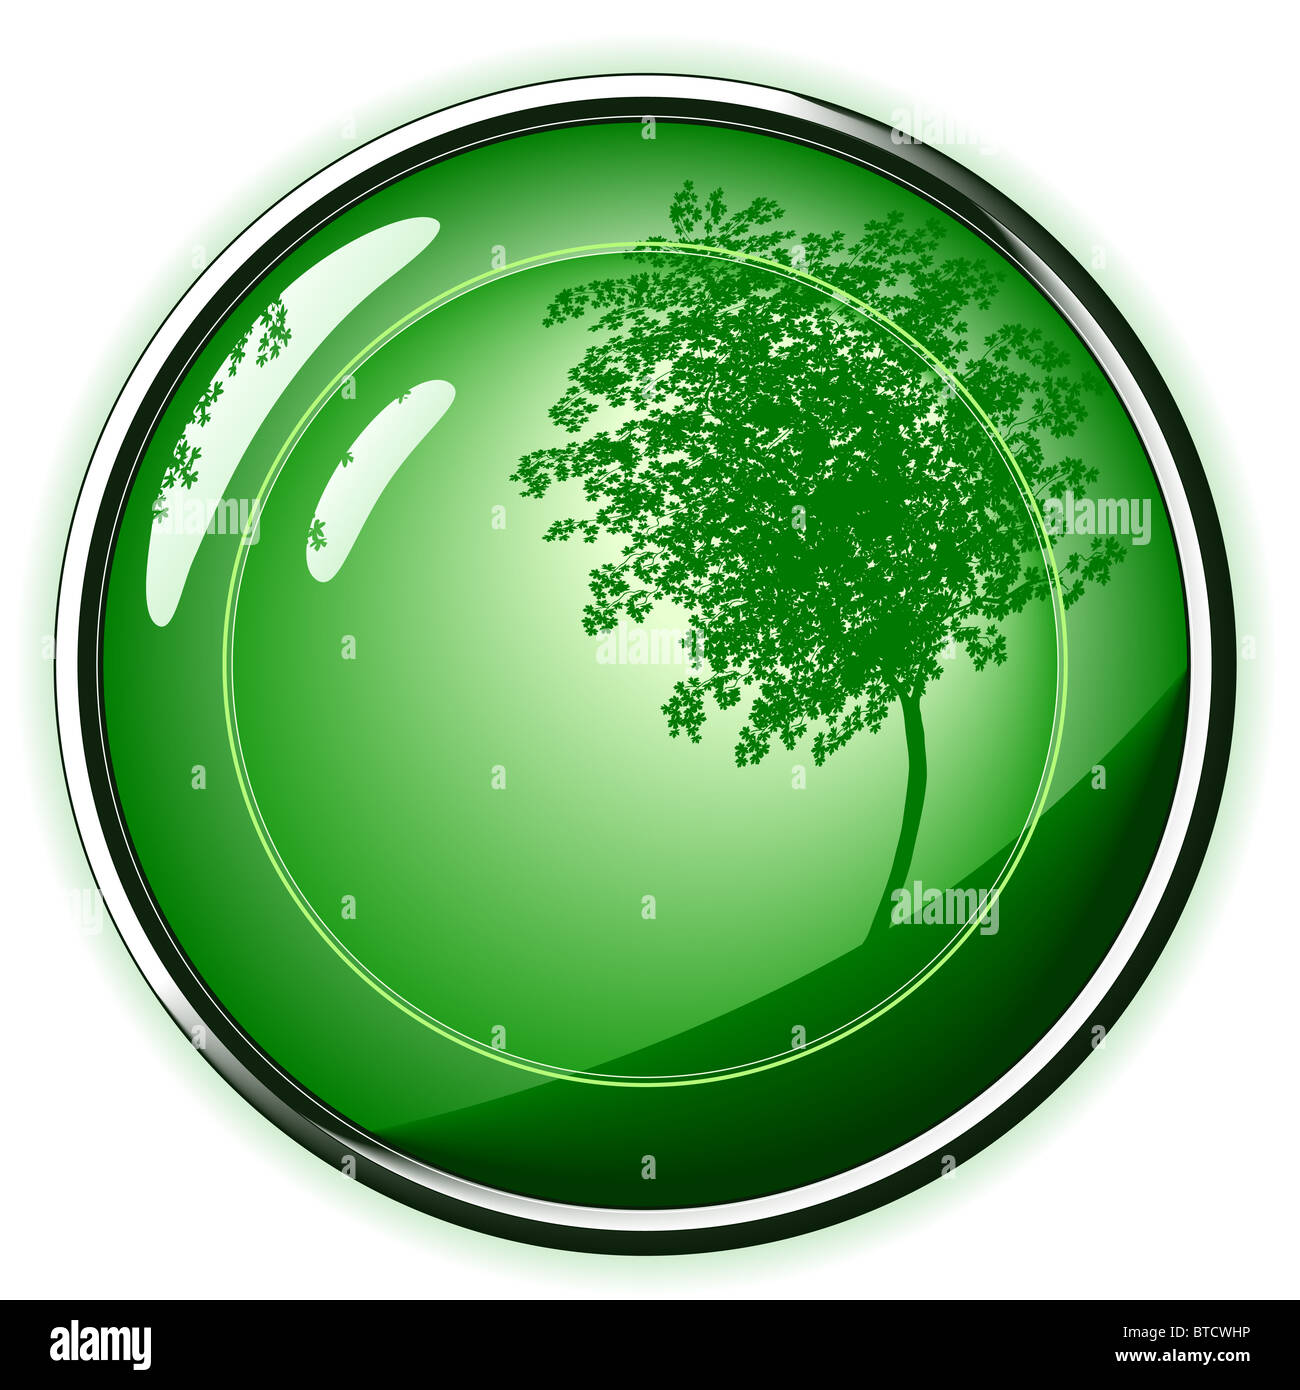 Illustrated glossy web button with tree silhouette Stock Photo